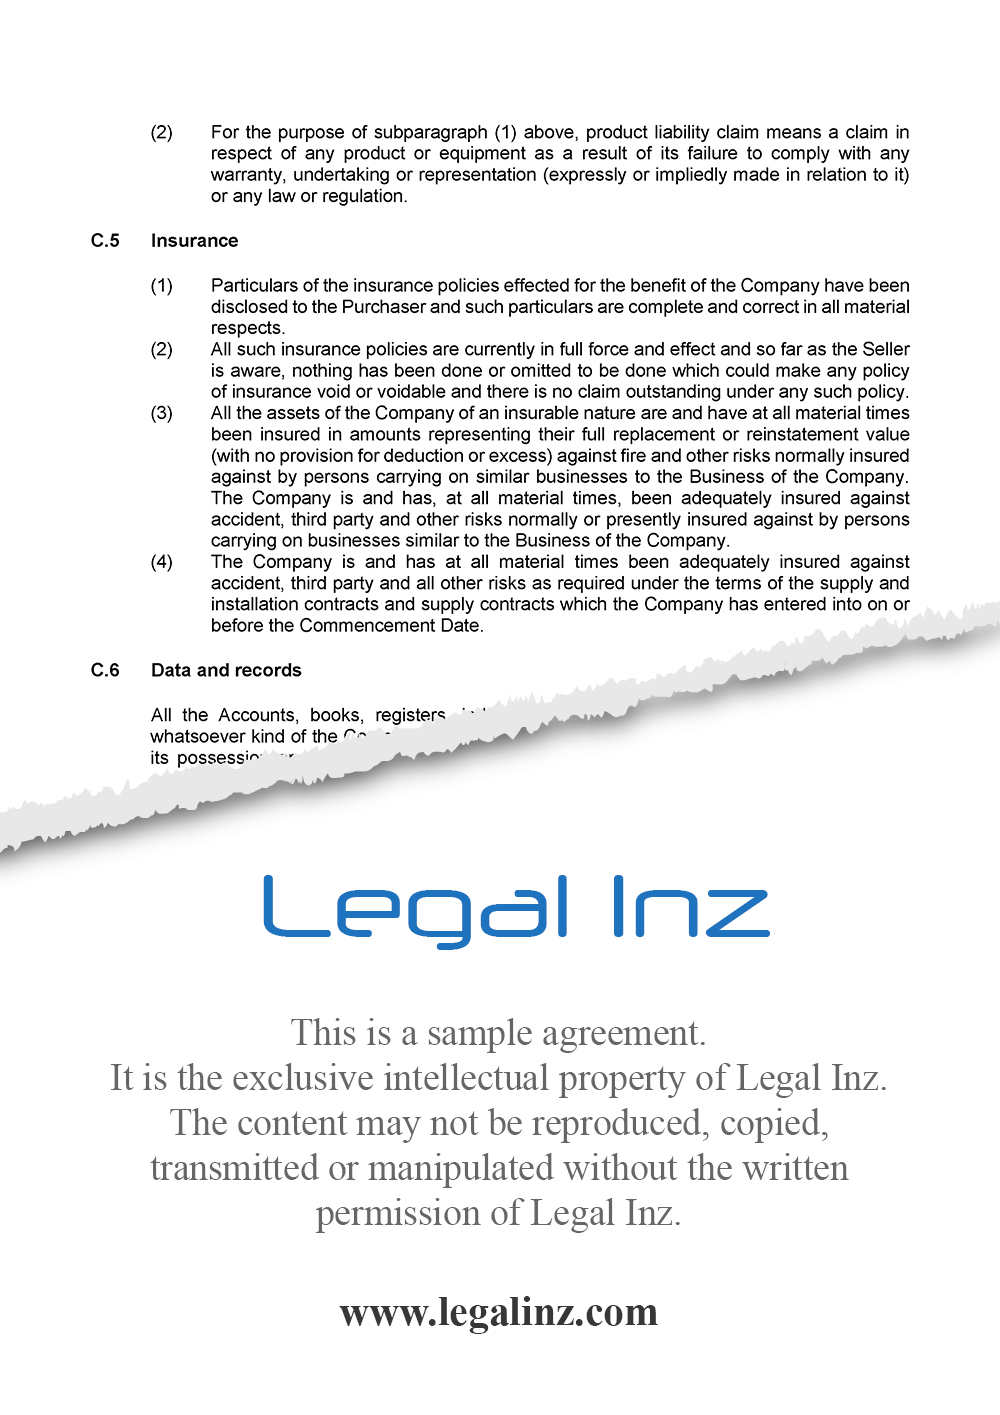 Share Purchase Agreement Sample 19